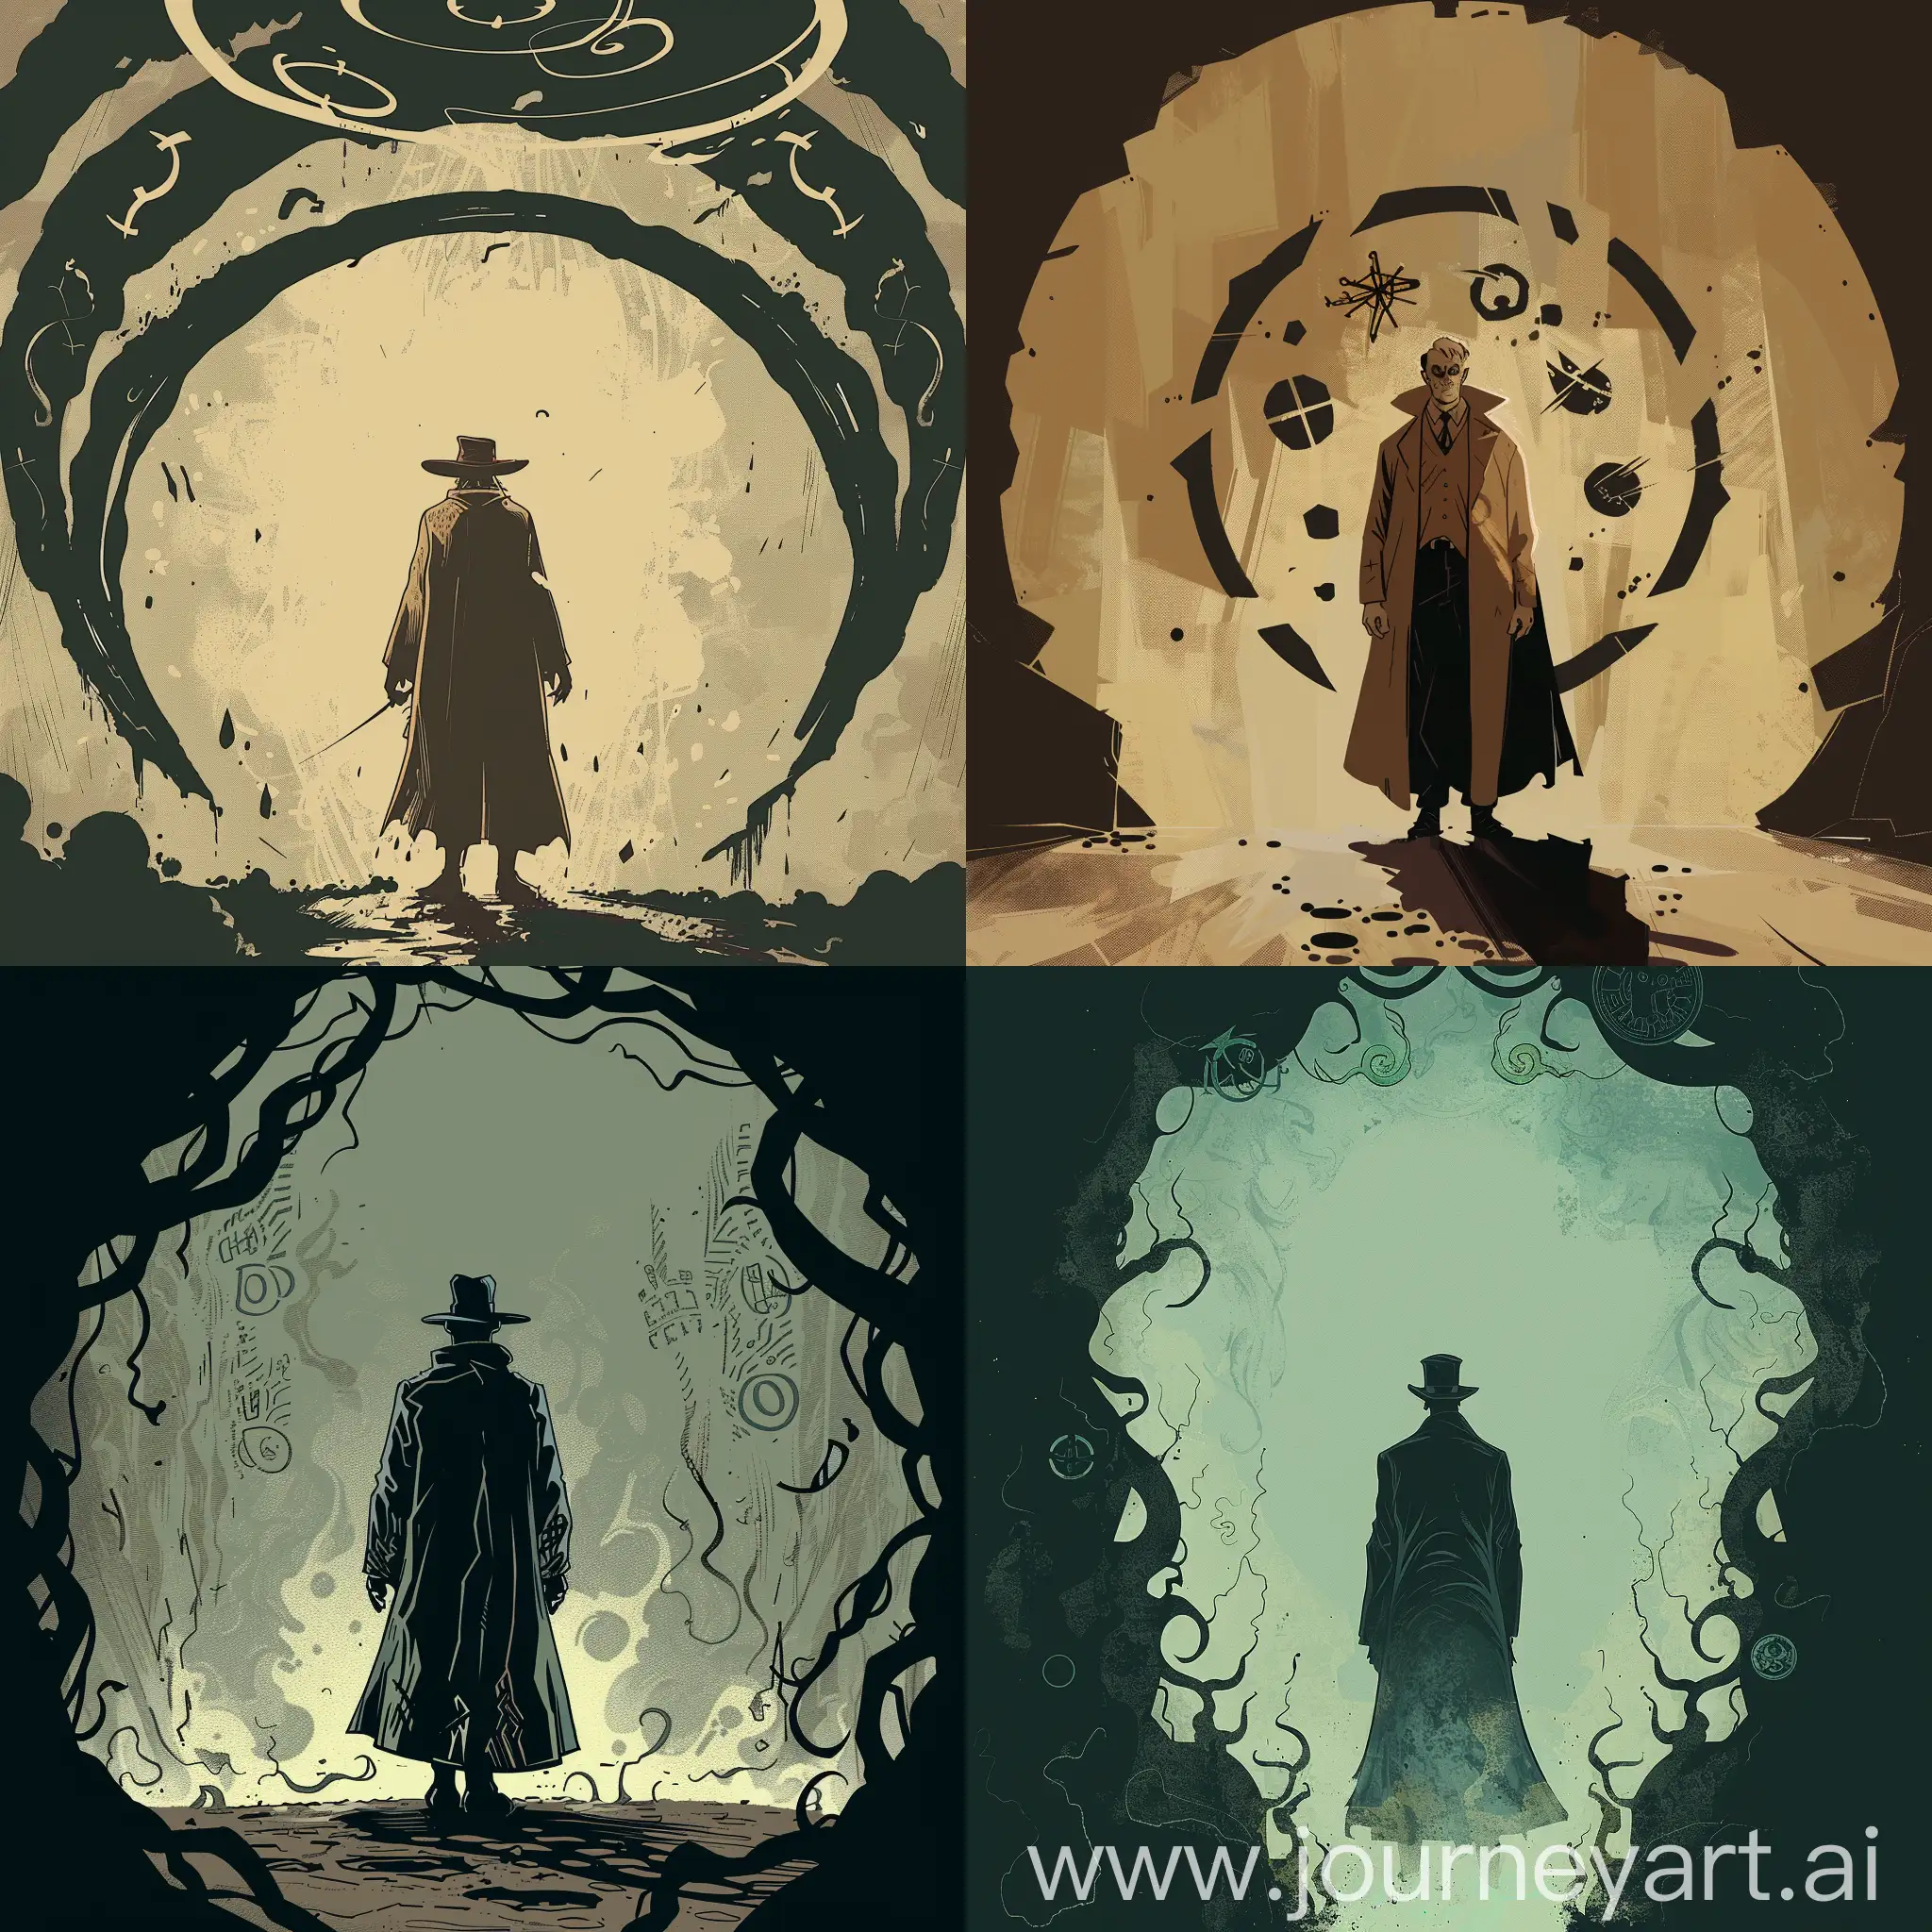  Craft an image of a solitary detective delving into supernatural mysteries, depicted in Mike Mignola's art style. The character should be framed by an aura of eldritch symbols, with pronounced shadows and a minimal color palette that evokes a sense of the arcane.